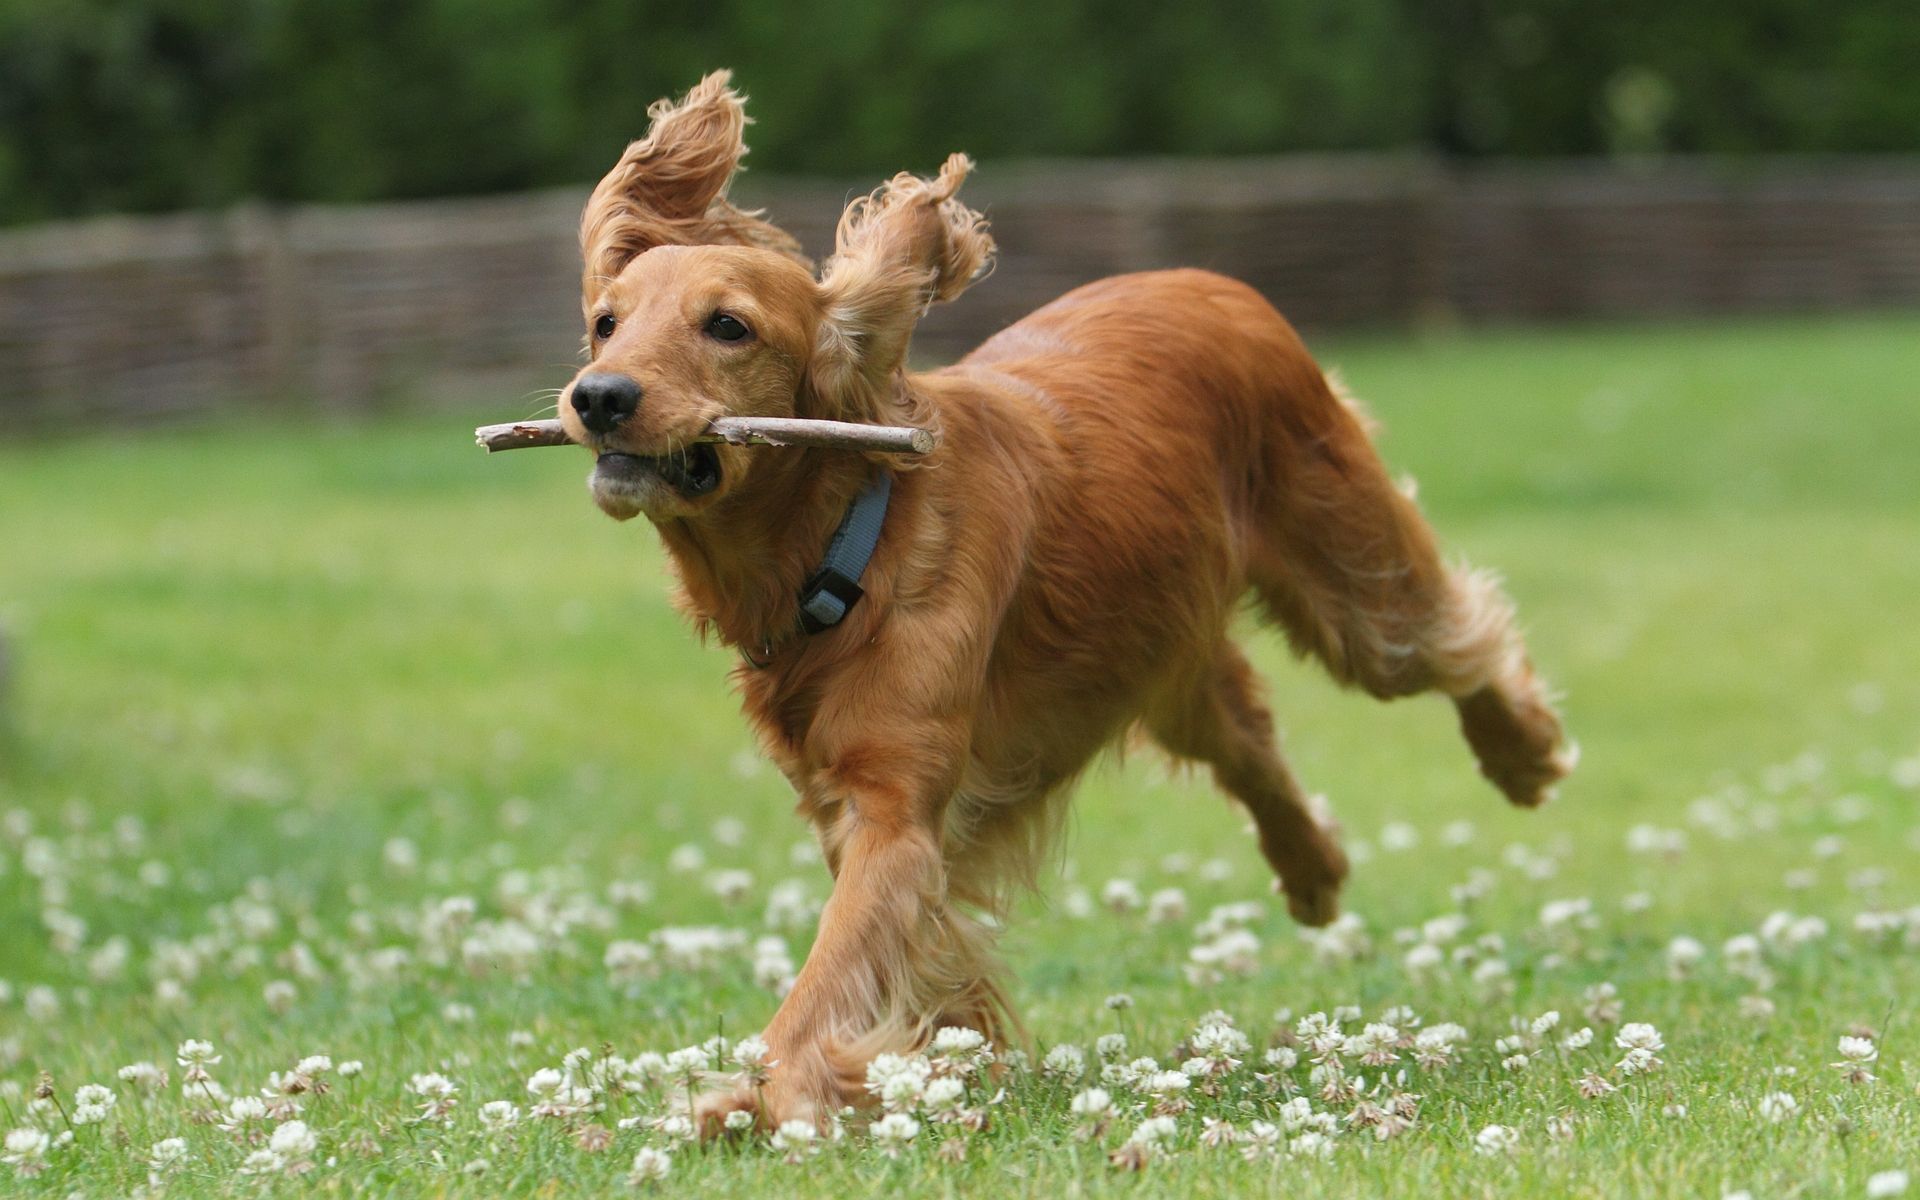 English Cocker Spaniel running in a field photo and wallpaper